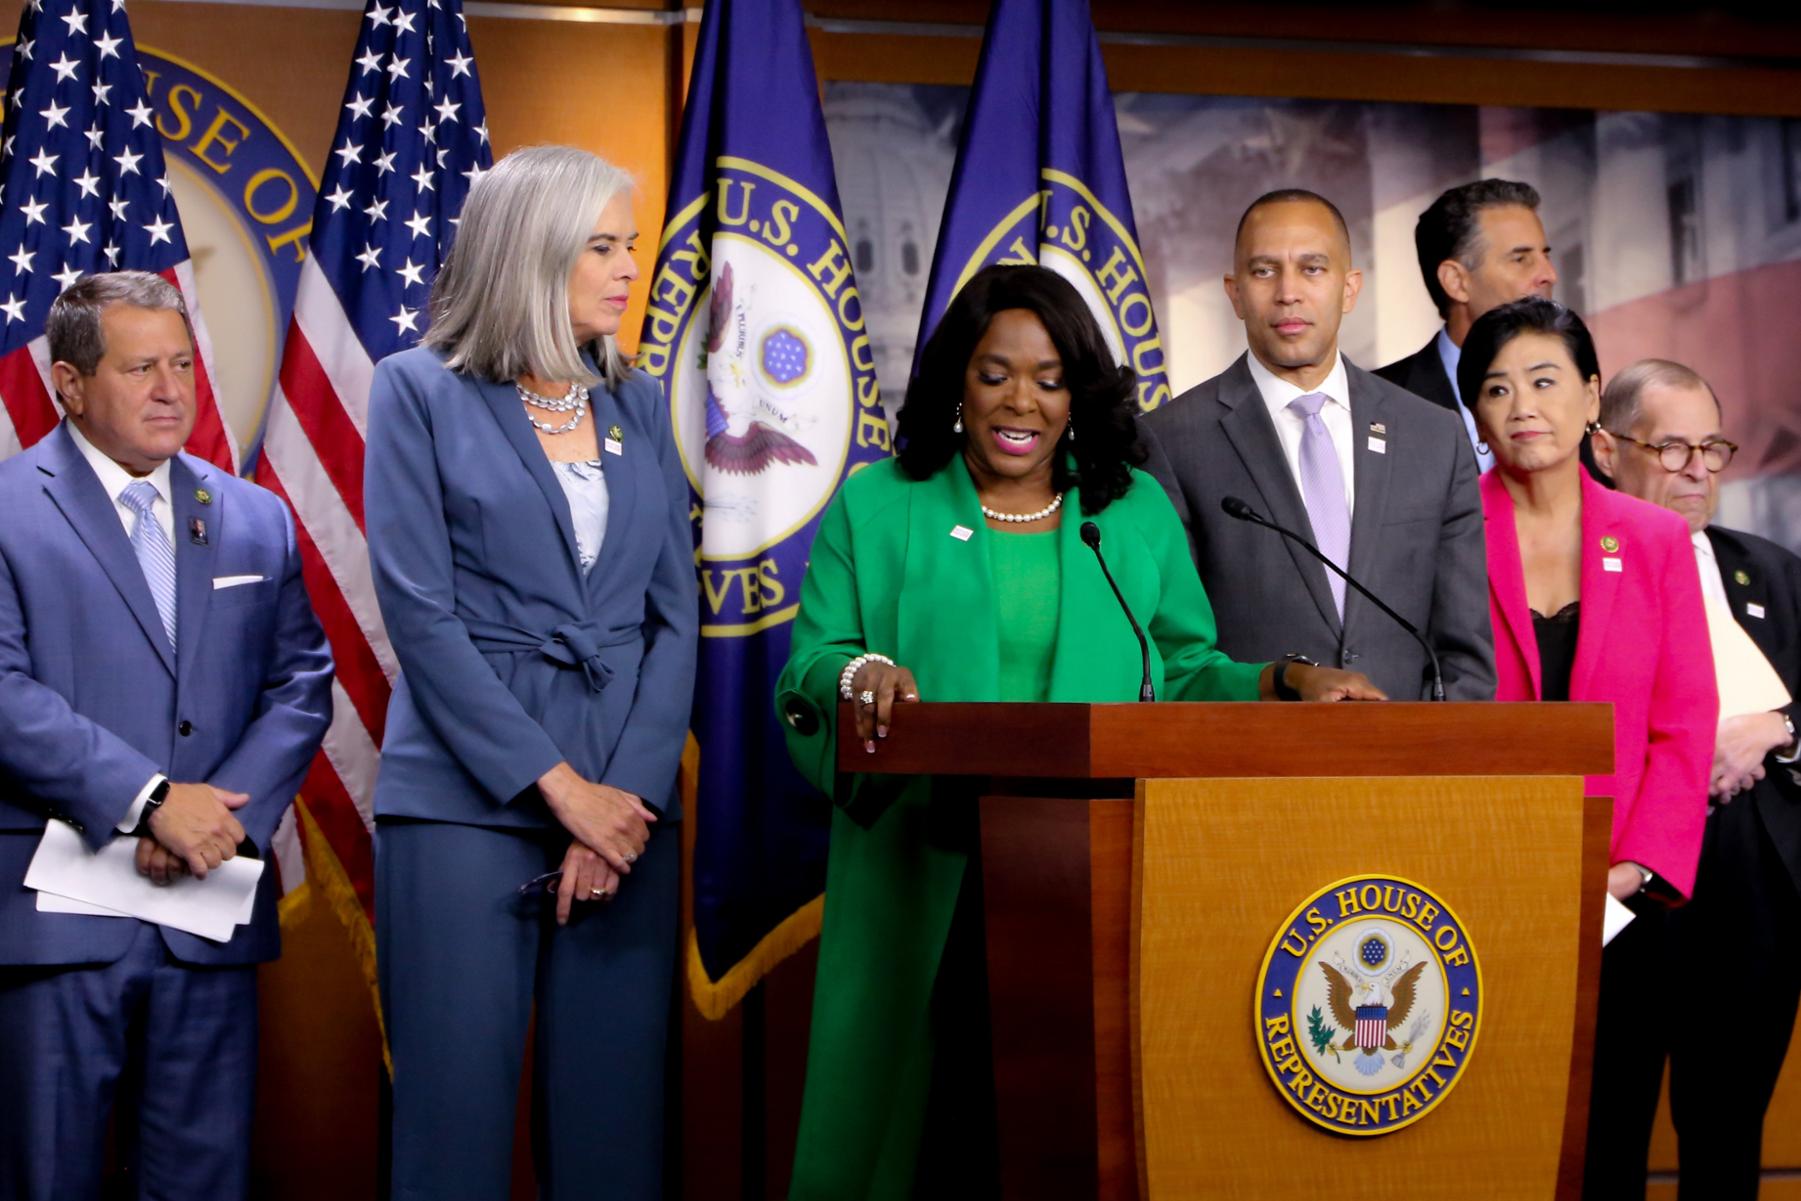 Read More - On National Voter Registration Day, Rep. Sewell and House Democrats Introduce the John R. Lewis Voting Rights Advancement Act